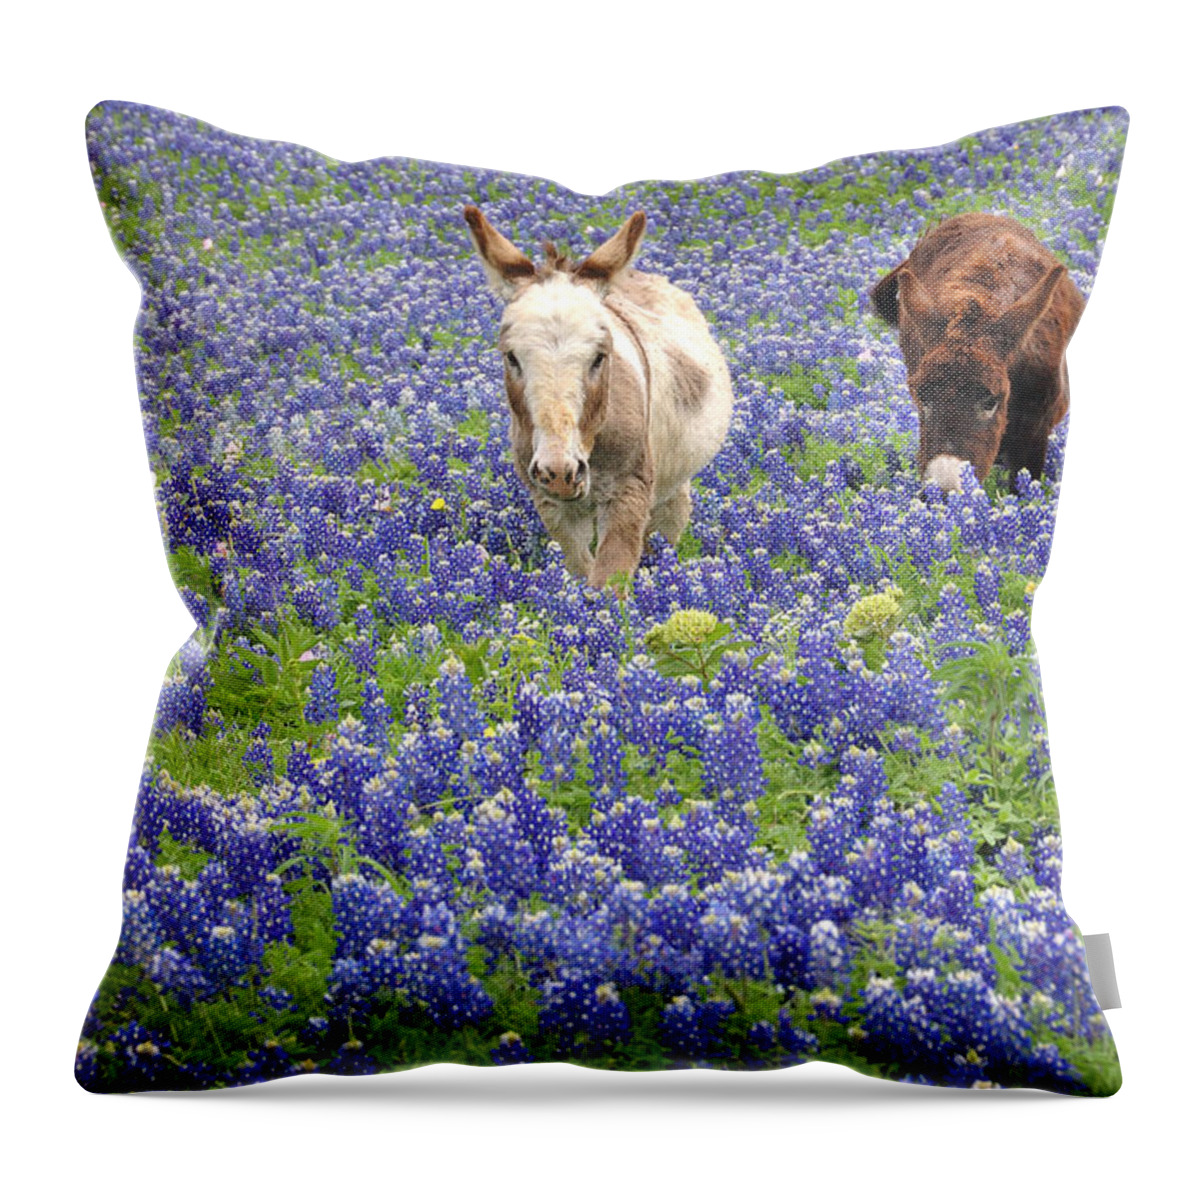 Texas Bluebonnets Throw Pillow featuring the photograph Texas Donkeys and Bluebonnets - Texas Wildflowers Landscape by Jon Holiday